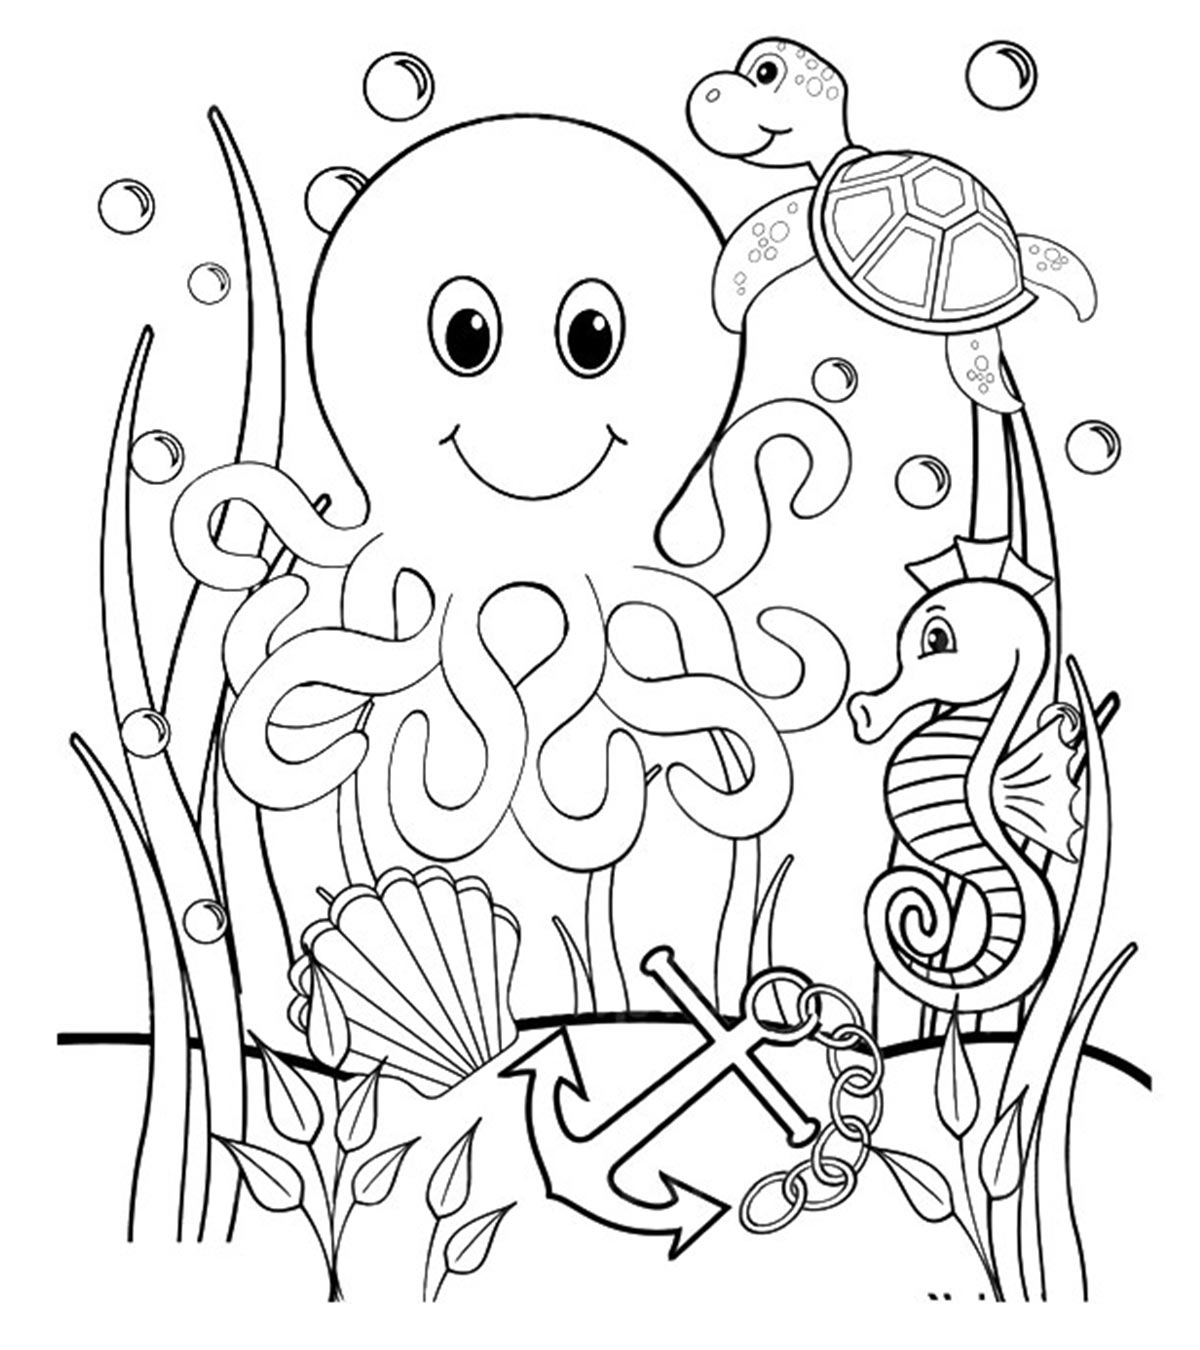 Underwater Coloring Pages - Coloringnori - Coloring Pages ...